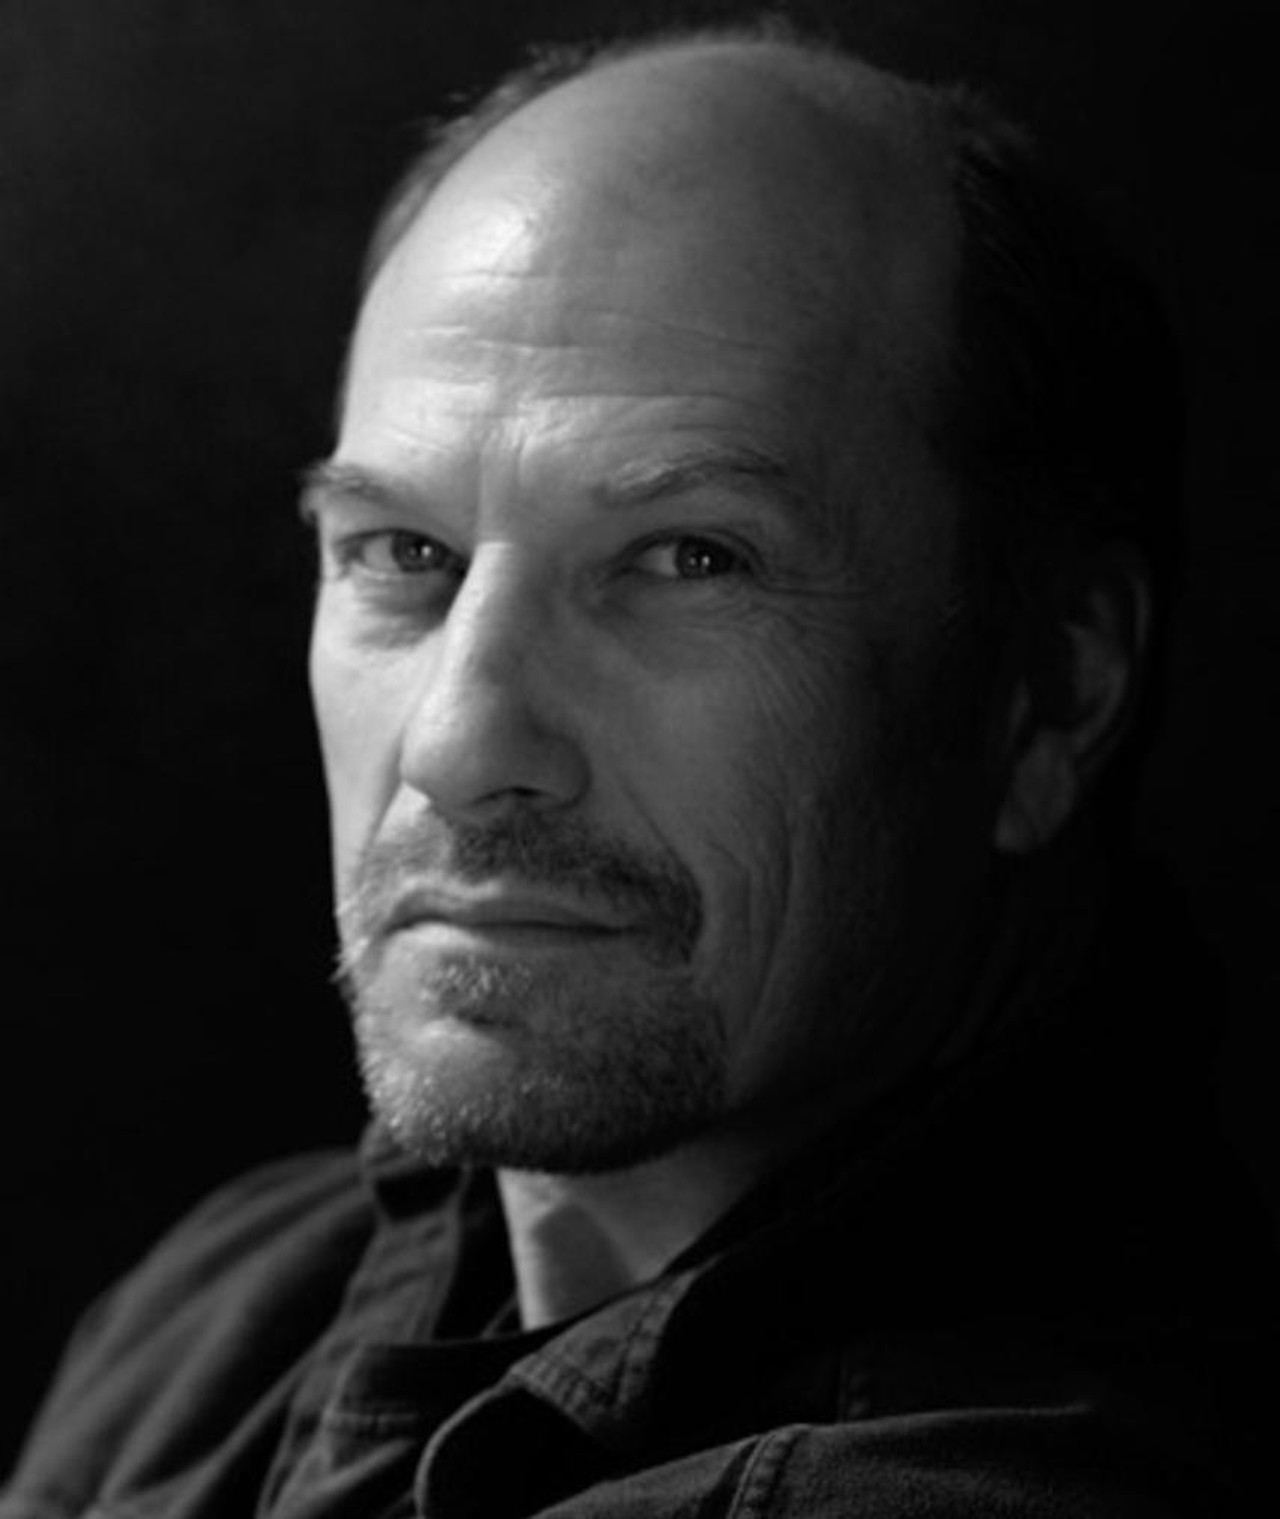 Photo of Ted Levine